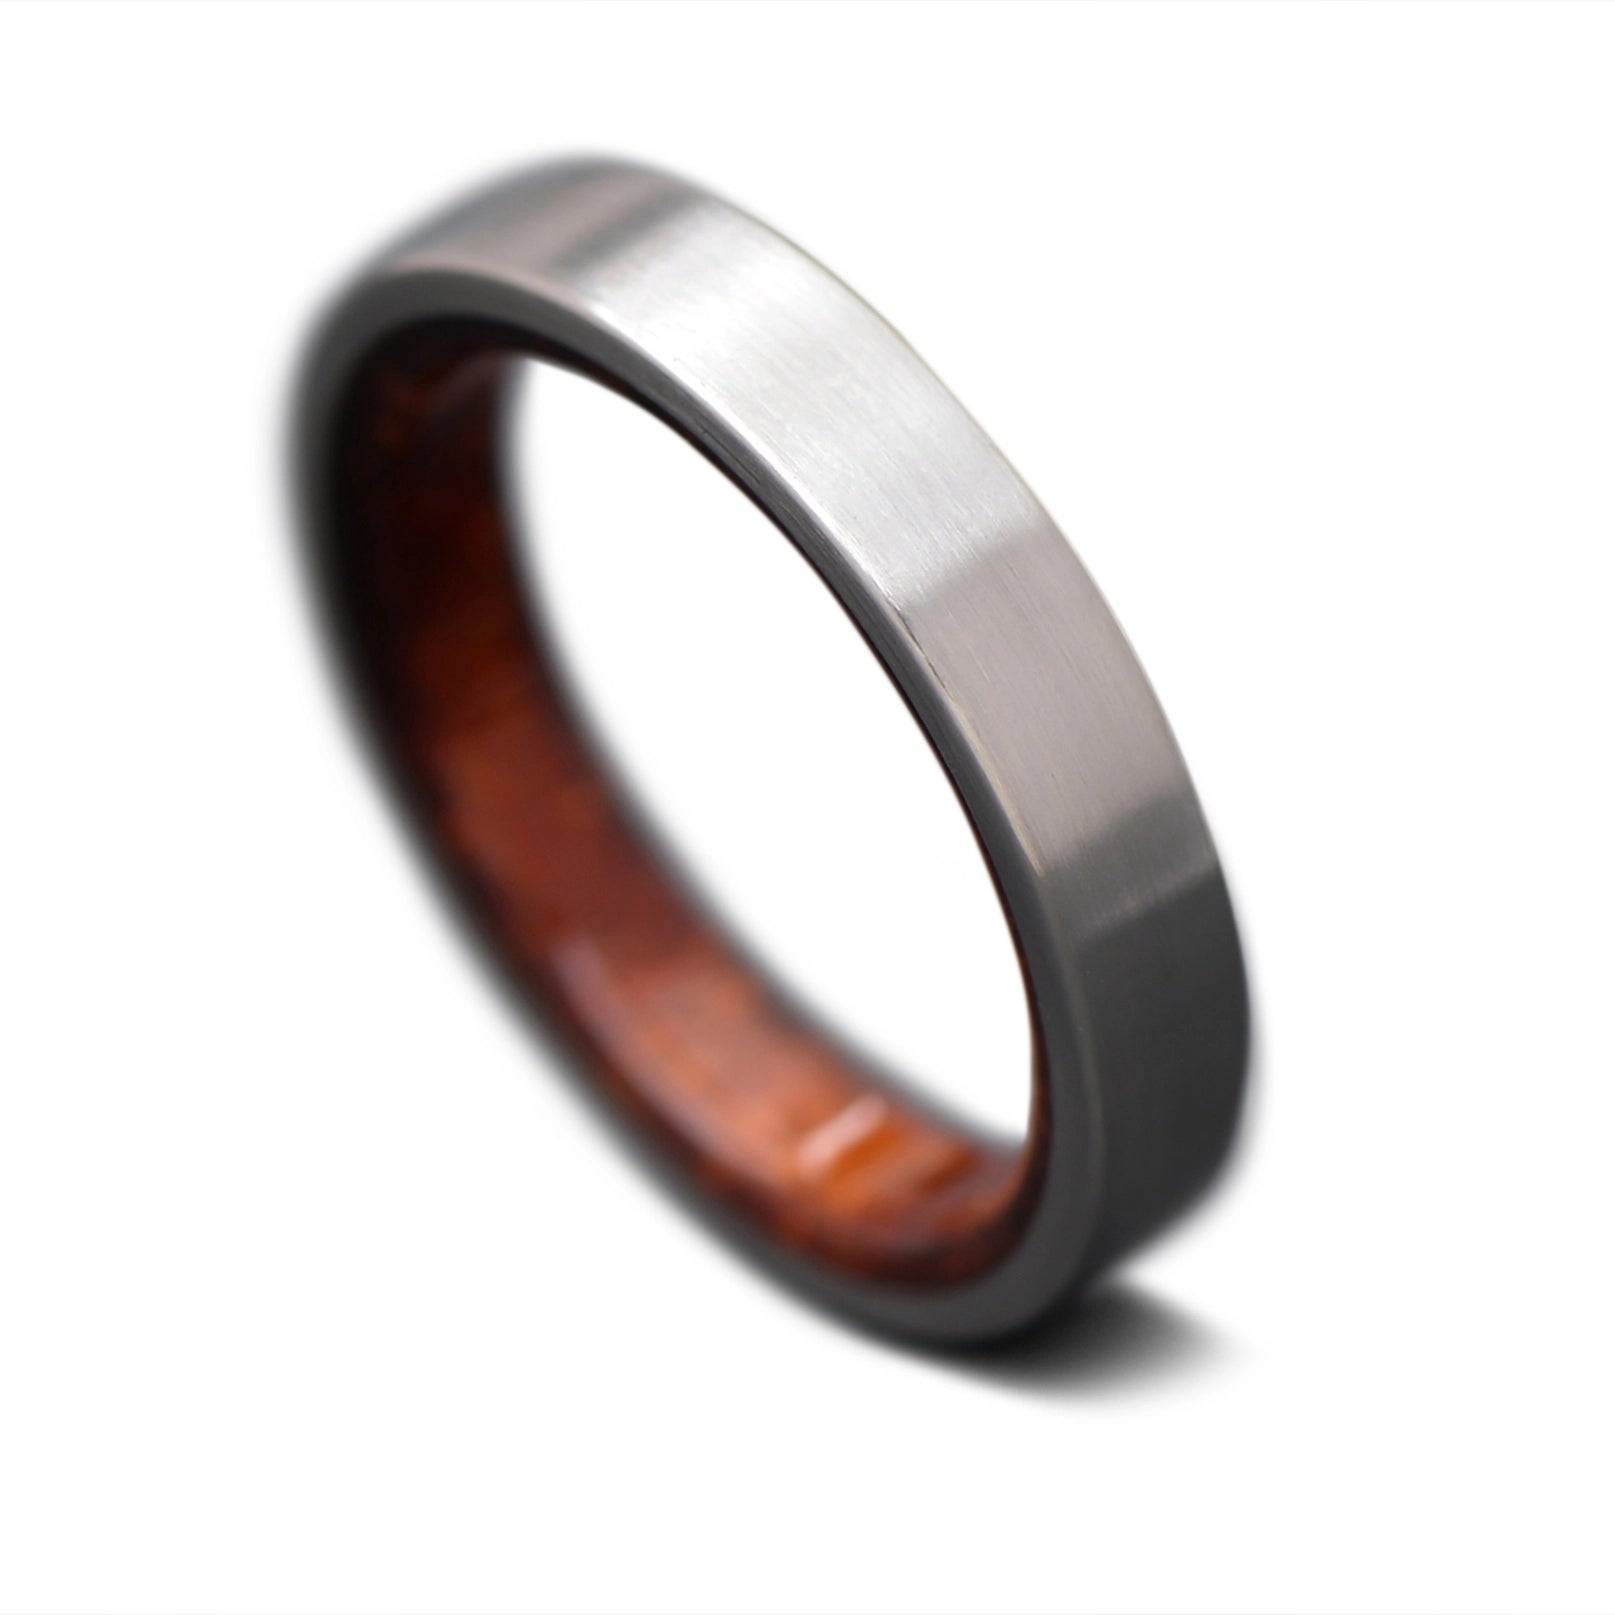 Back of Titanium Core ring with Mahogany inner sleeve, 4mm -THE TITAN